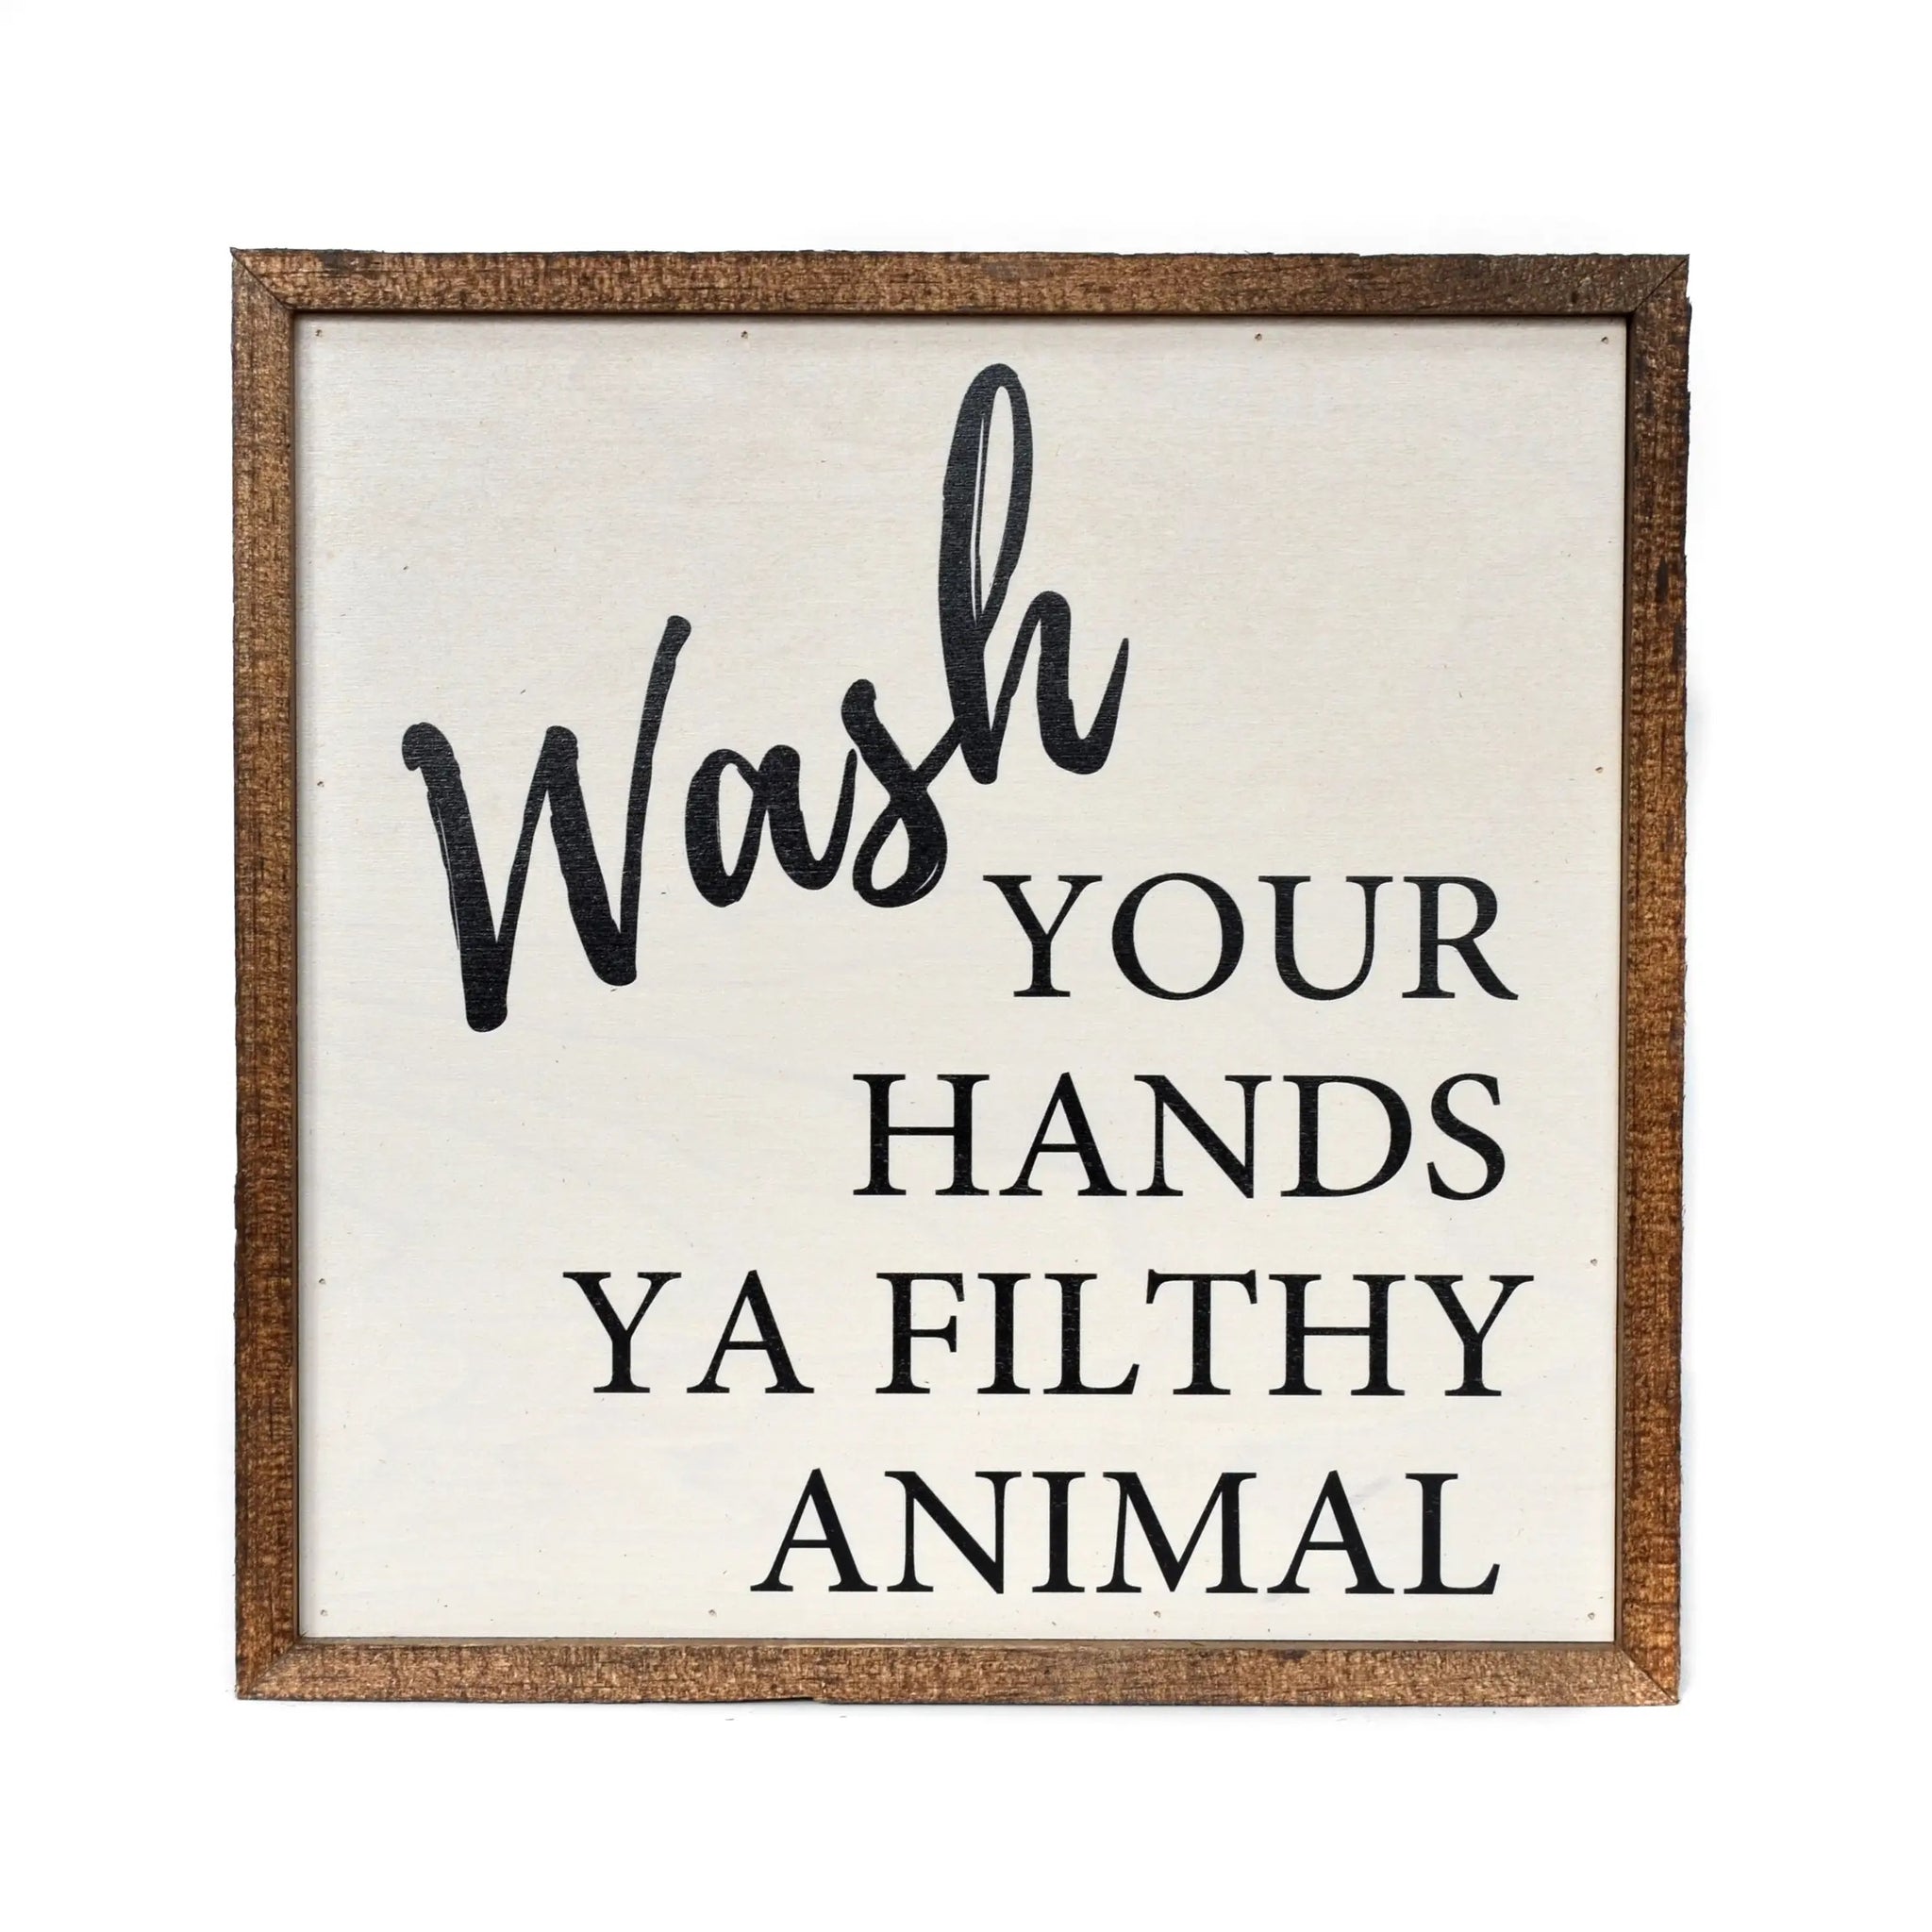 “WASH YOUR HANDS” RUSTIC SIGN